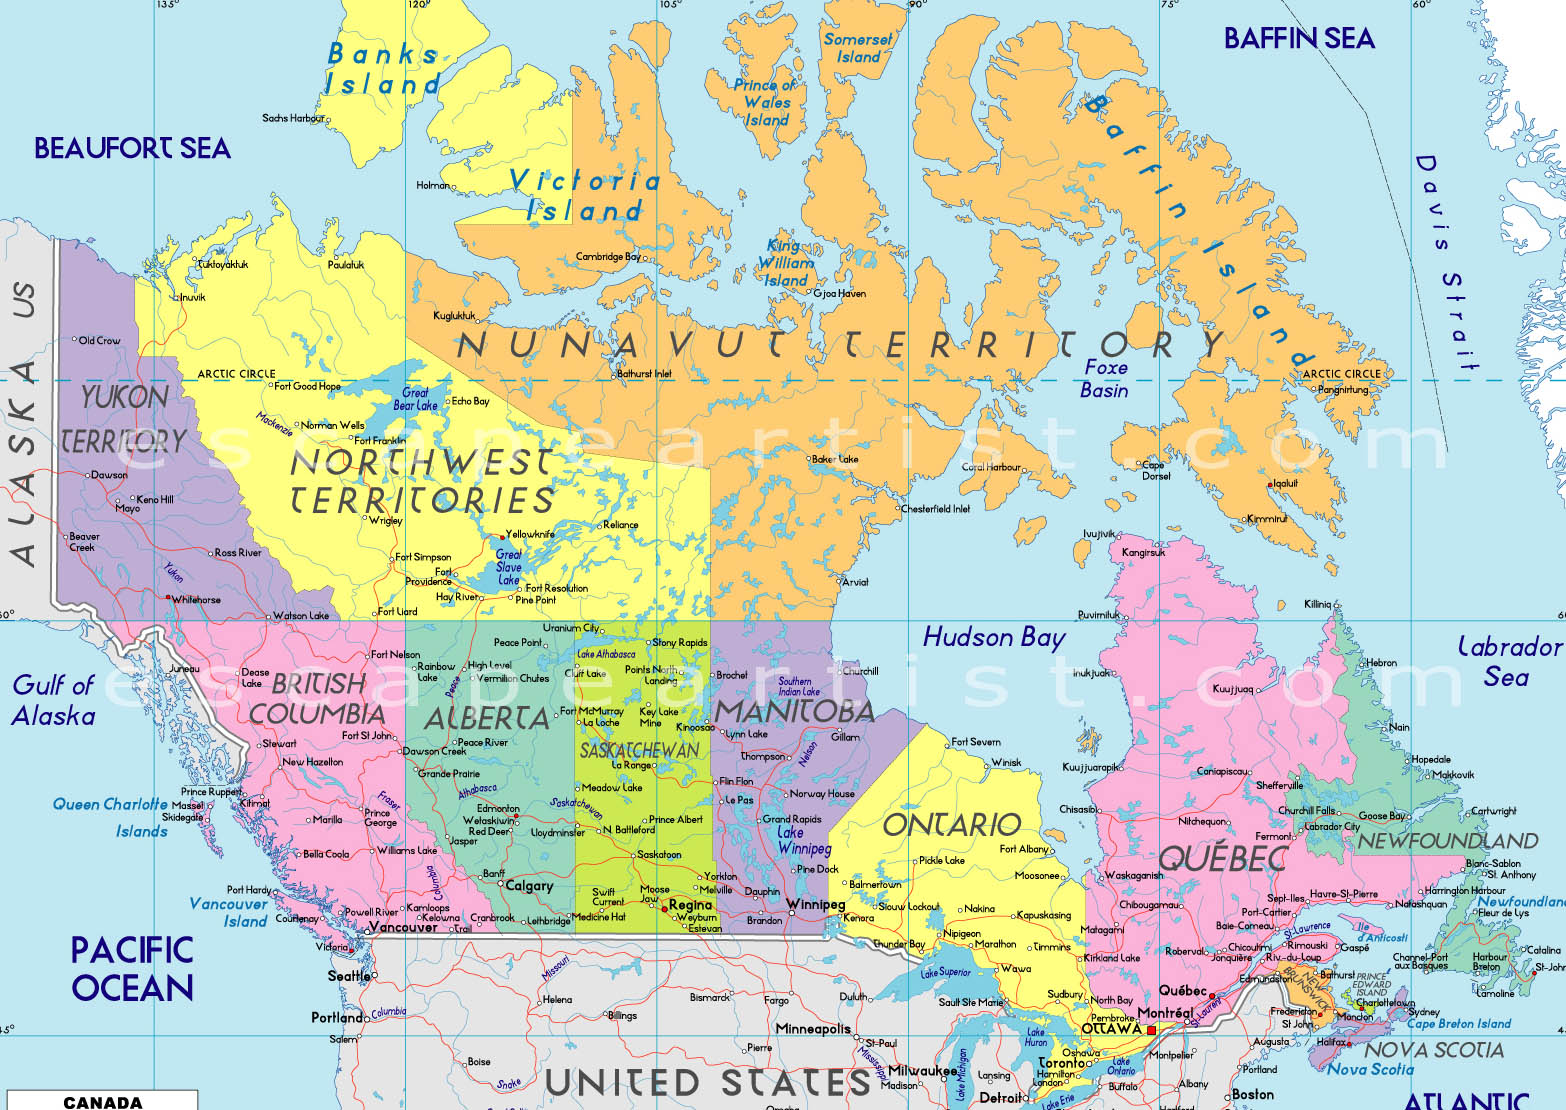 questions-regarding-the-states-or-provinces-in-canada-health-care